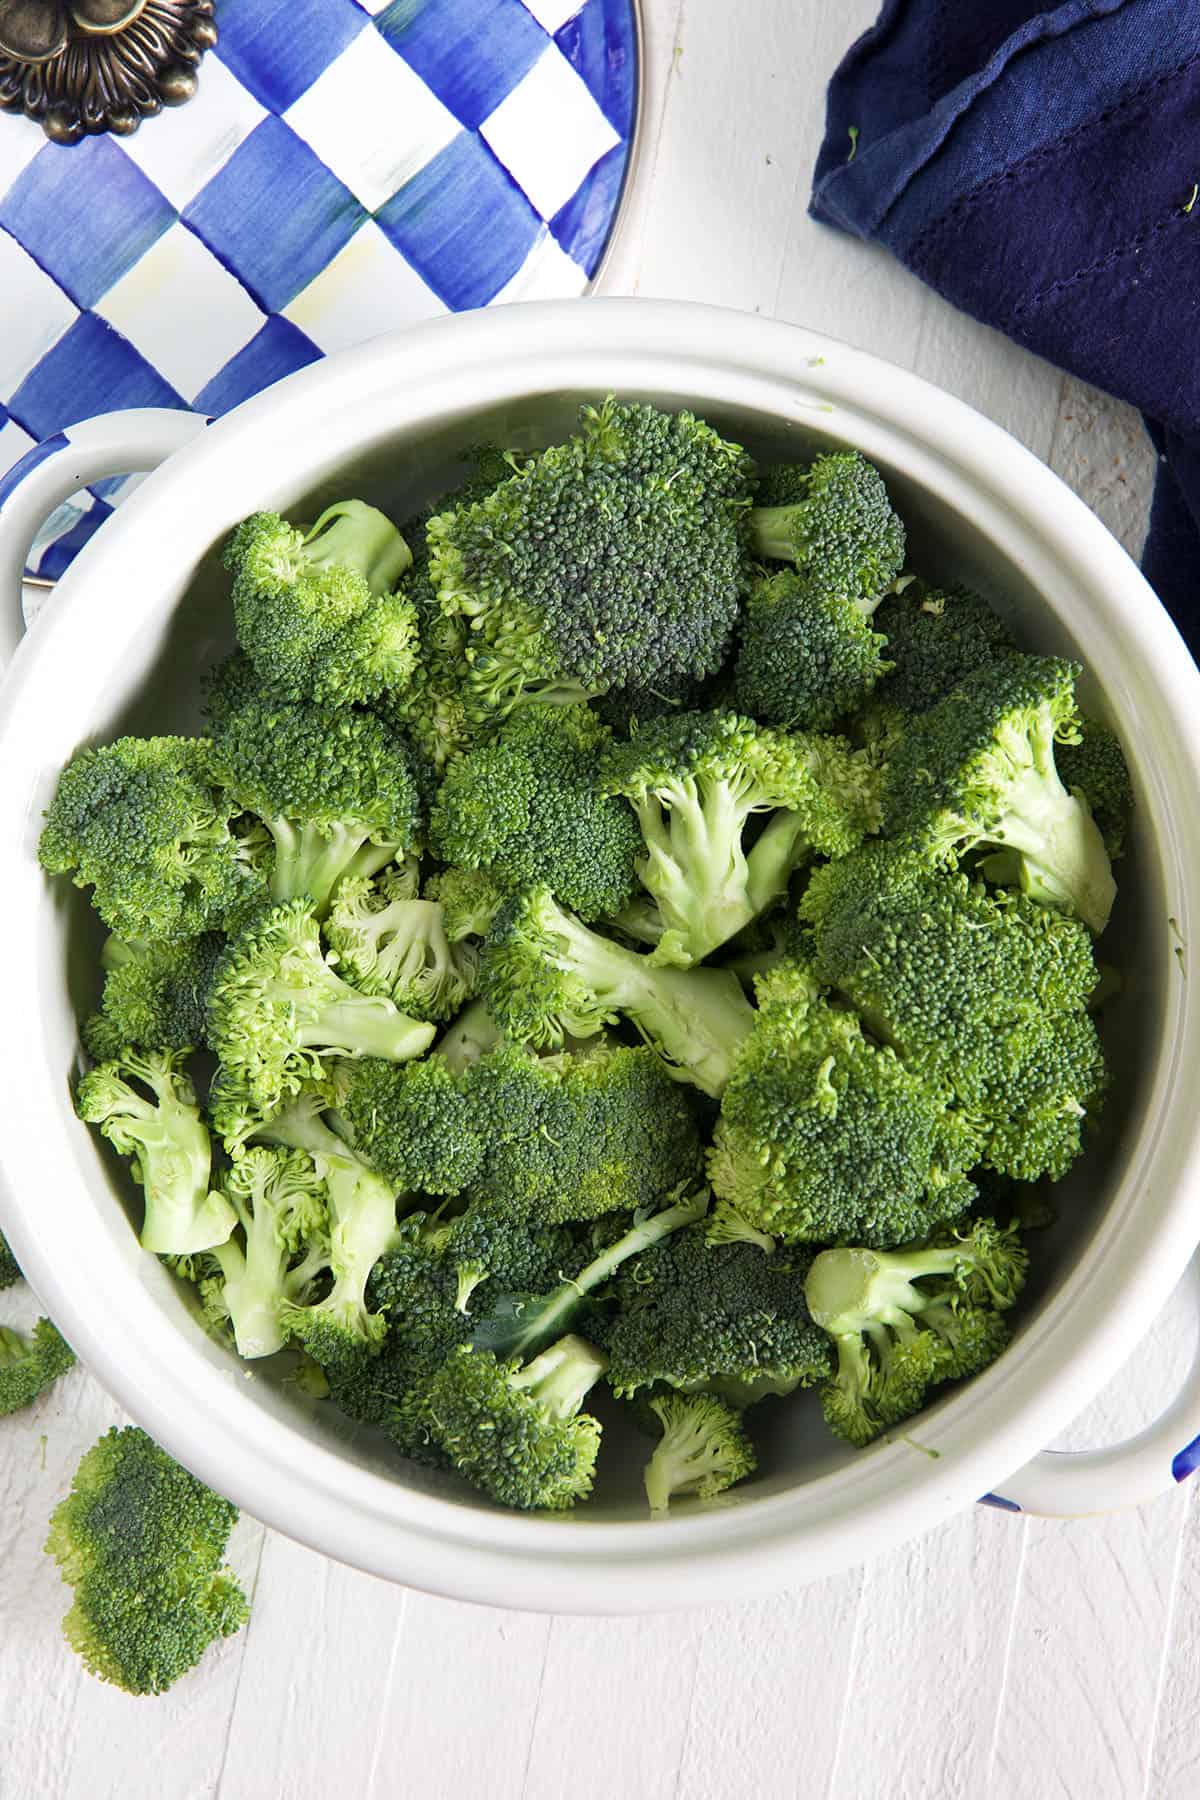 A bowl is filled with uncooked broccoli.